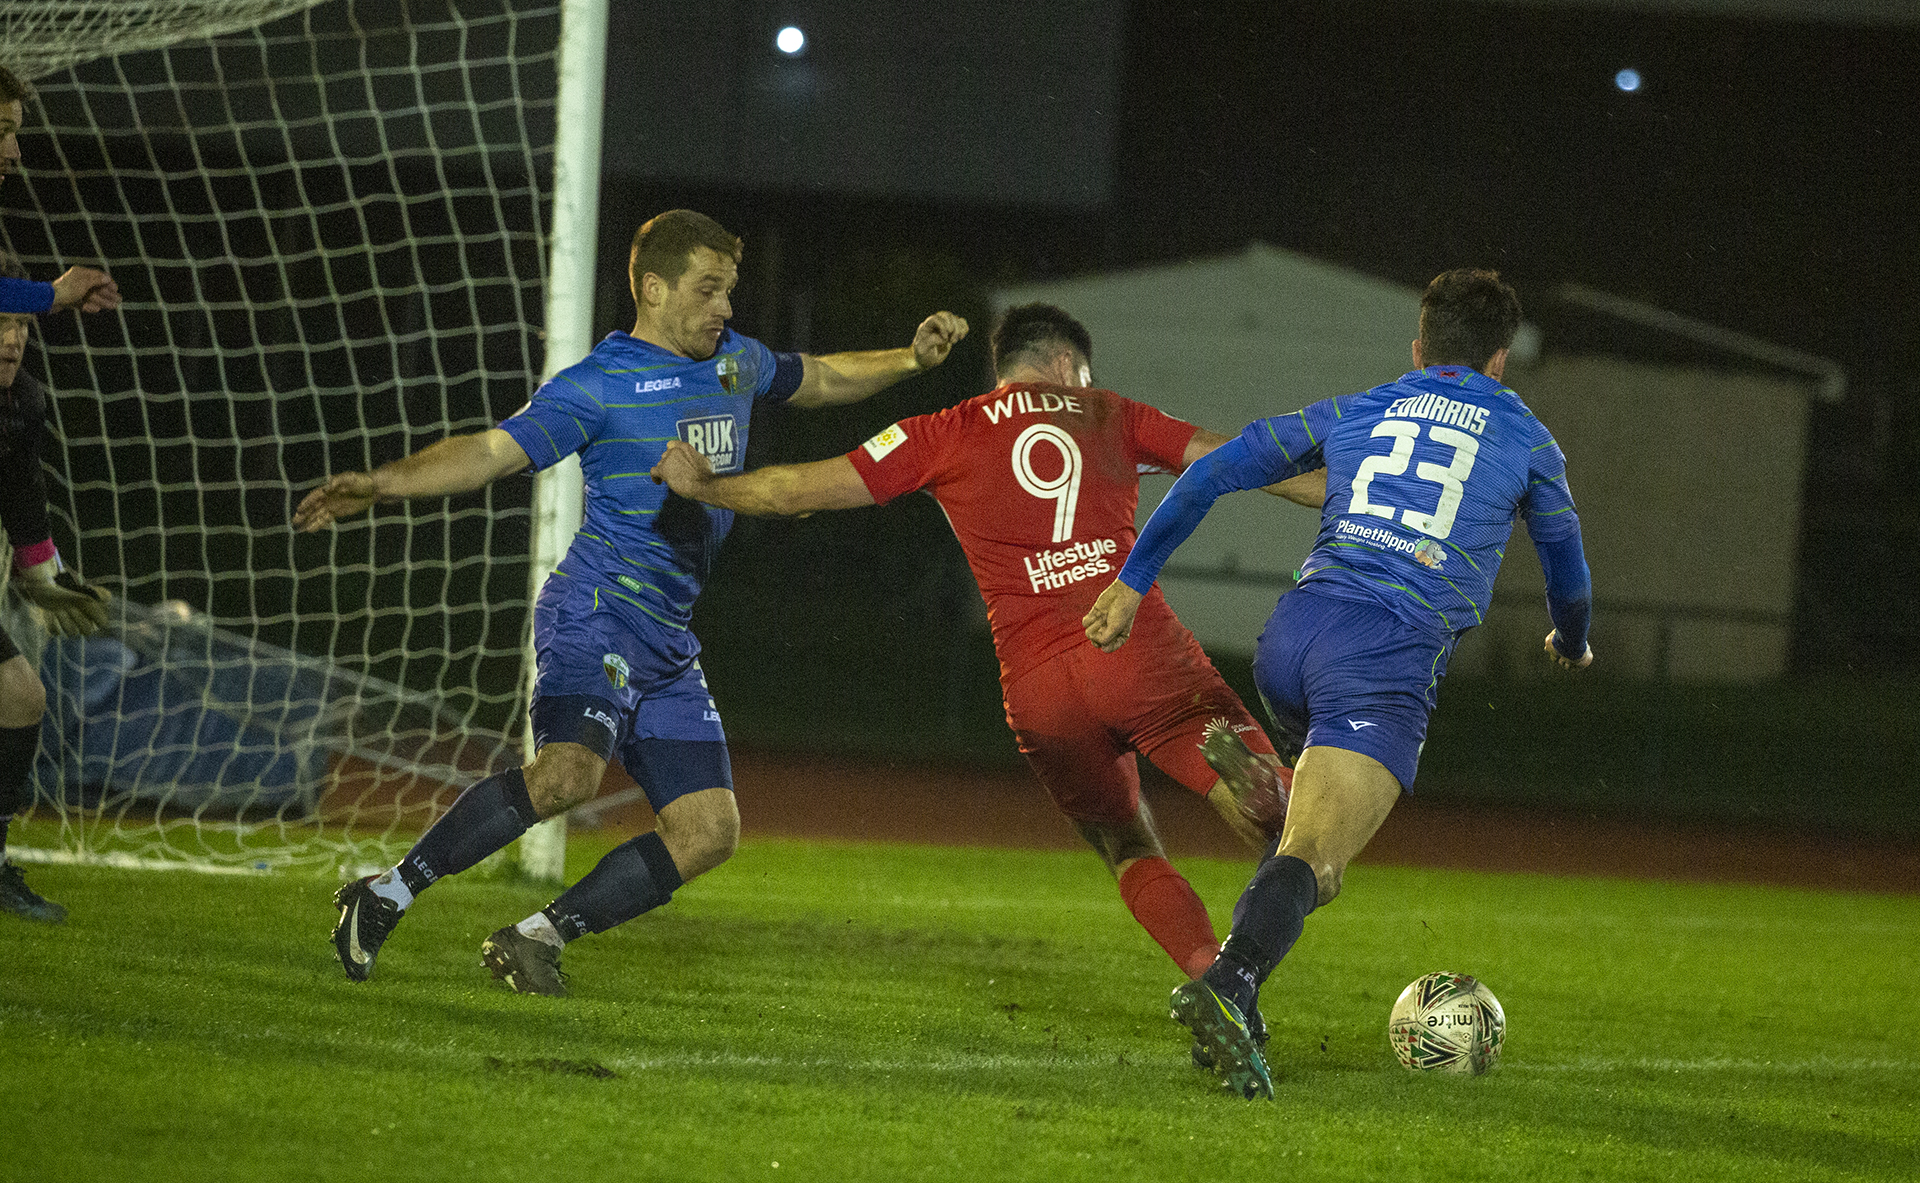 Michael Wilde goes for goal in the second half | © NCM Media